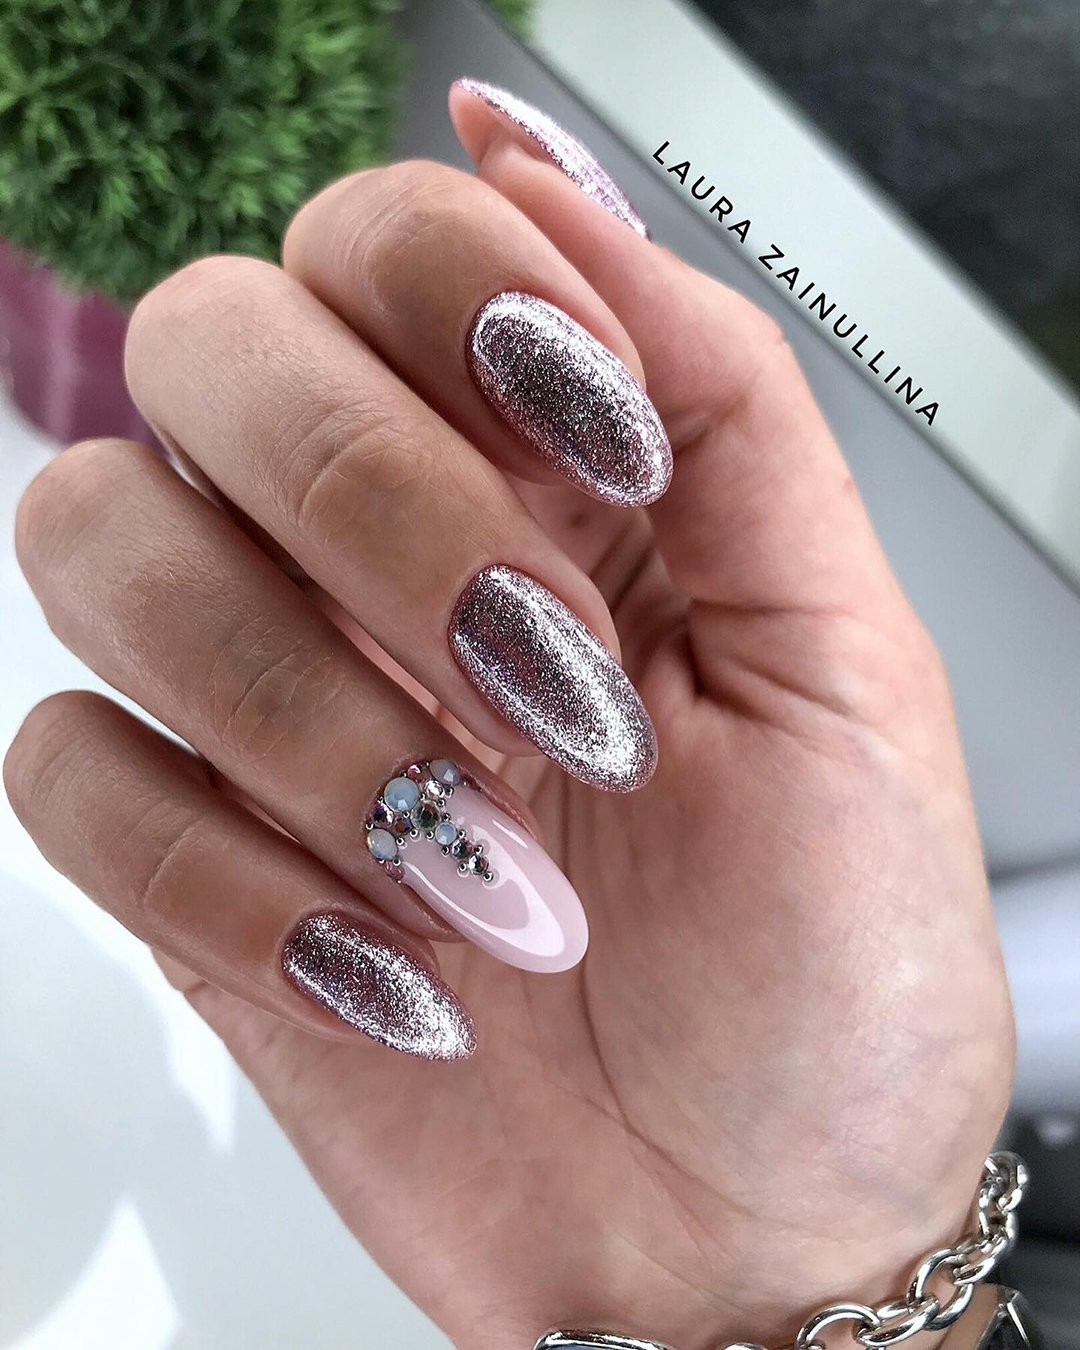 wedding nails design gentle pink with silver glitter laura_nails_studio